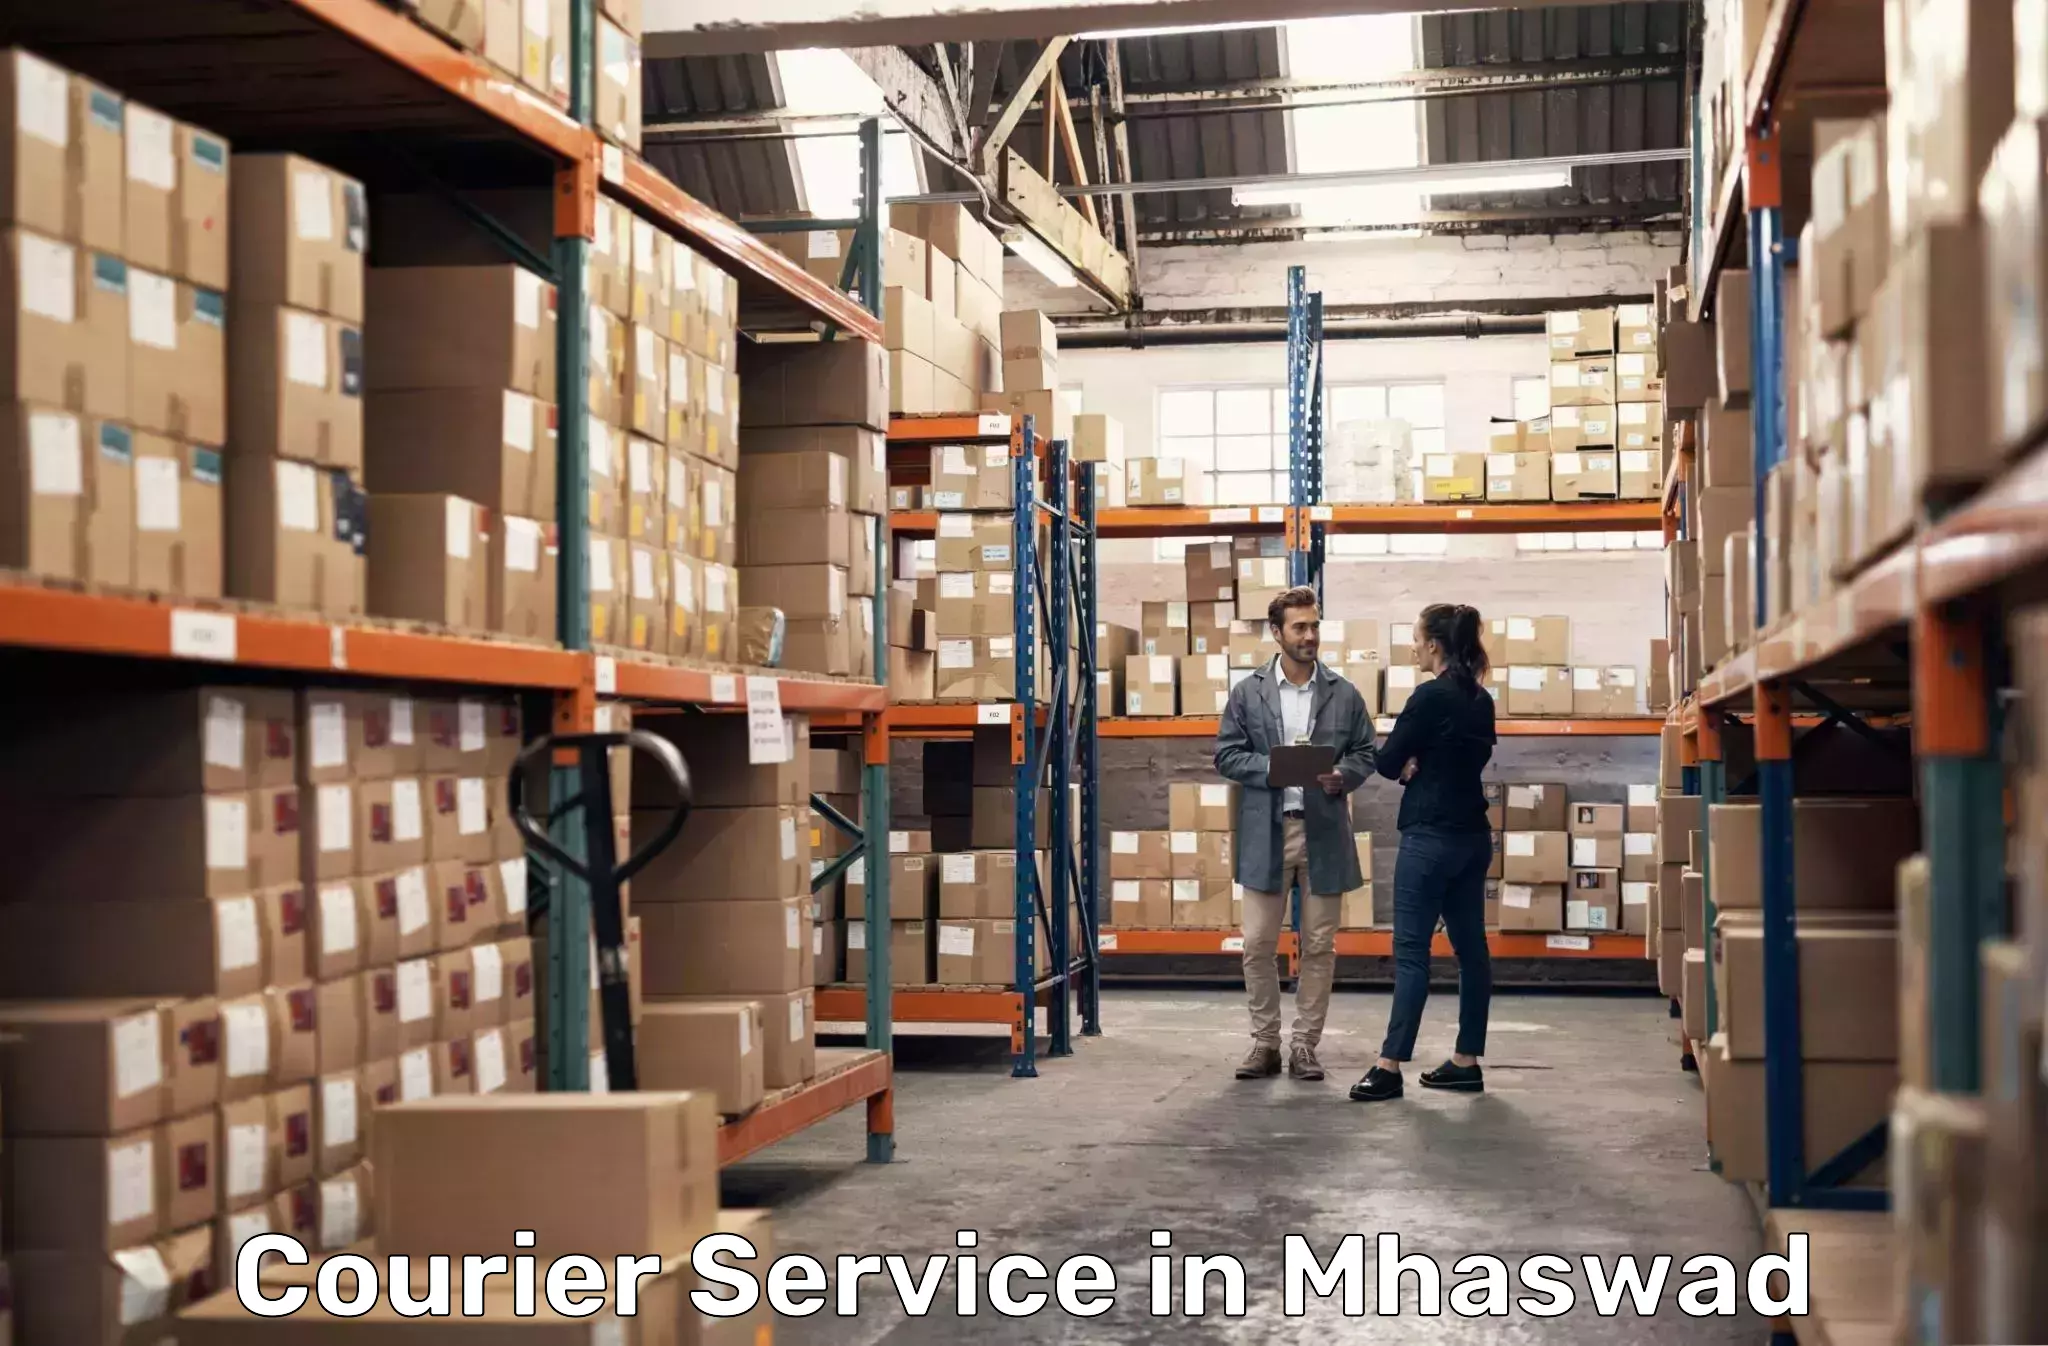 Overnight delivery services in Mhaswad